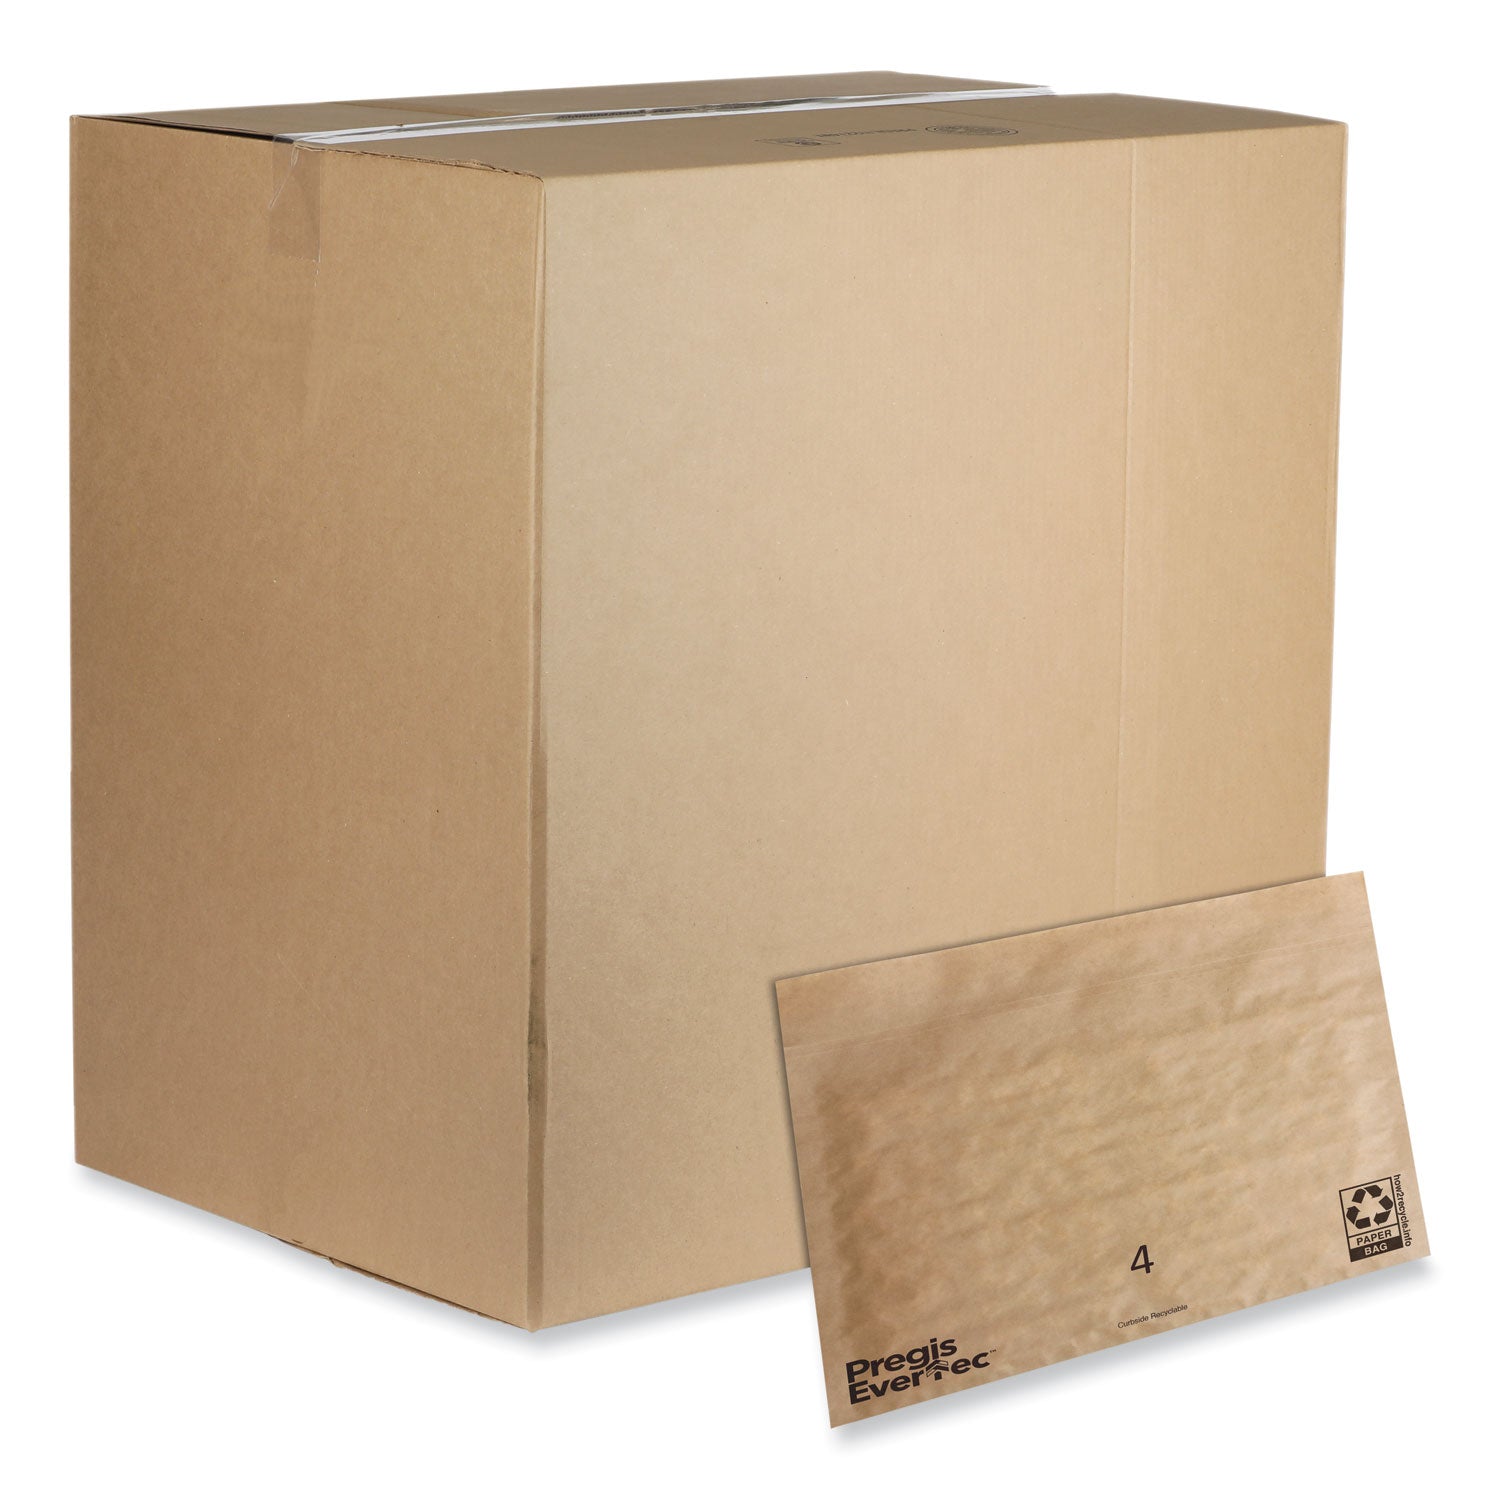 evertec-curbside-recyclable-padded-mailer-#4-kraft-paper-self-adhesive-closure-14-x-9-brown-150-carton_pgs4083815 - 1